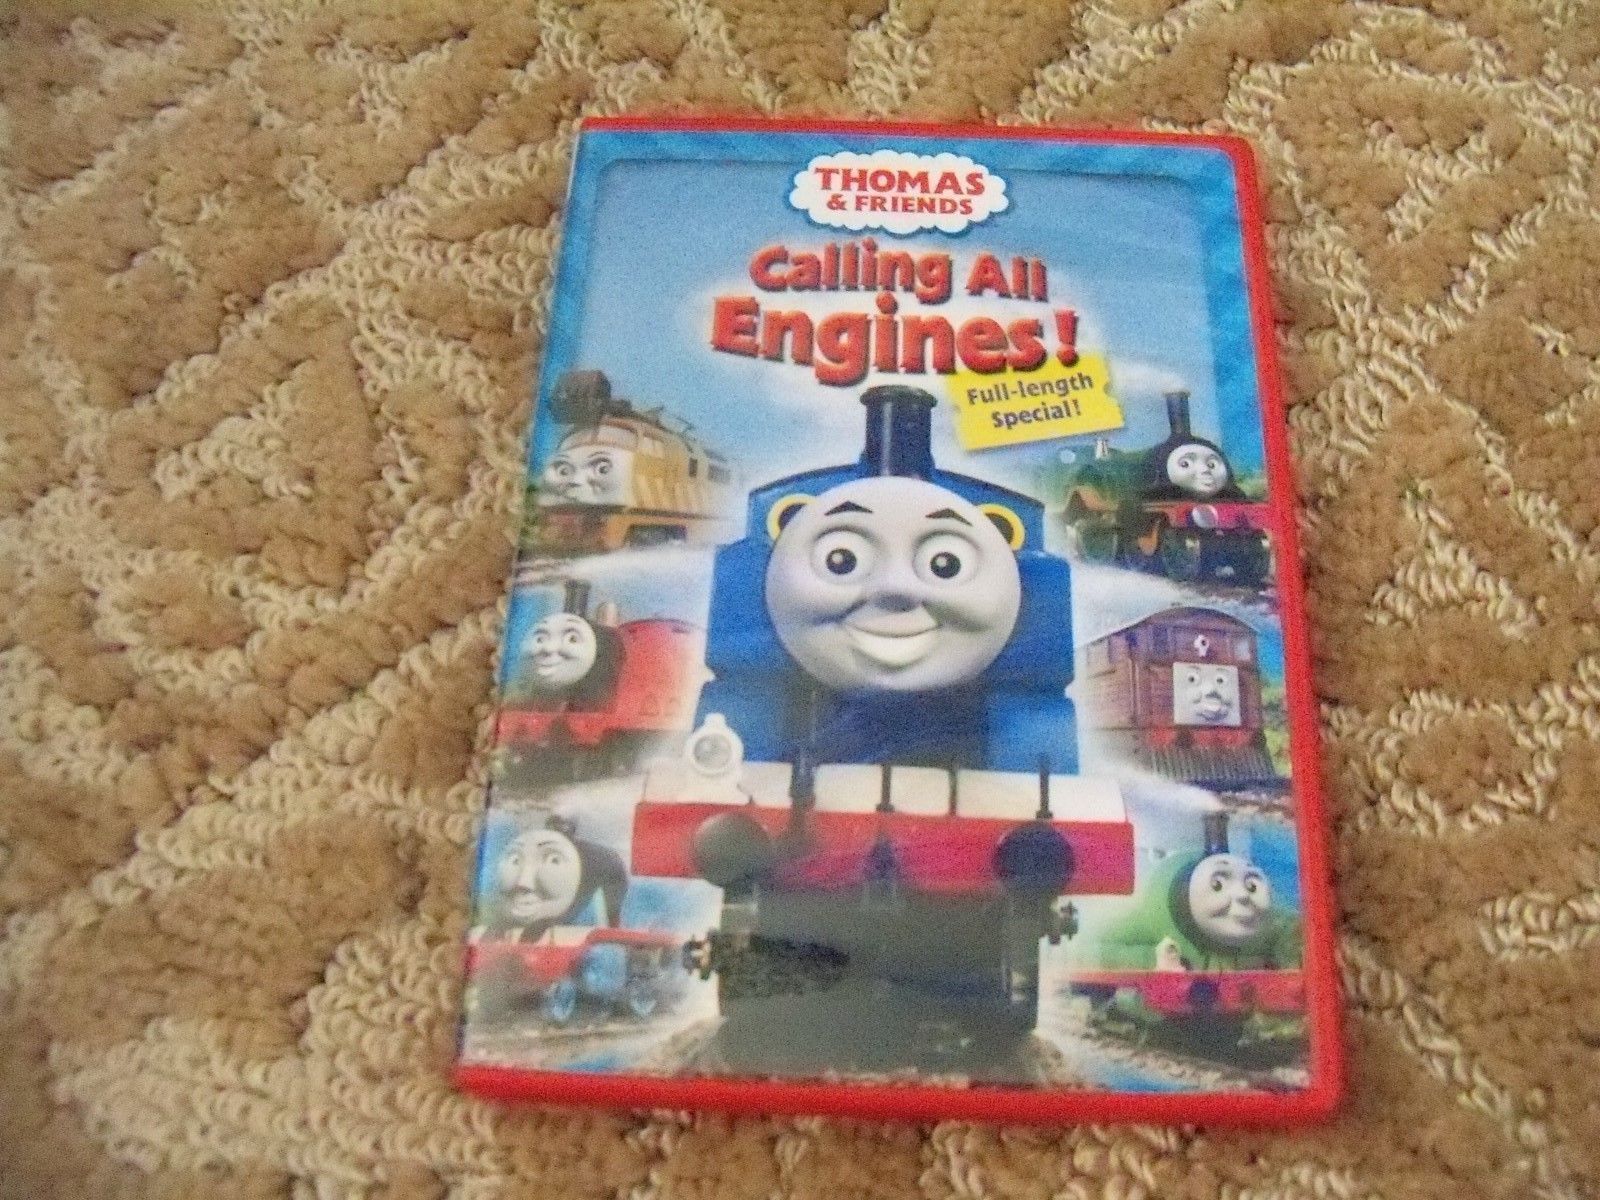 Thomas & Friends Calling All Engines (DVD, 2005) EUC DVDs & Bluray